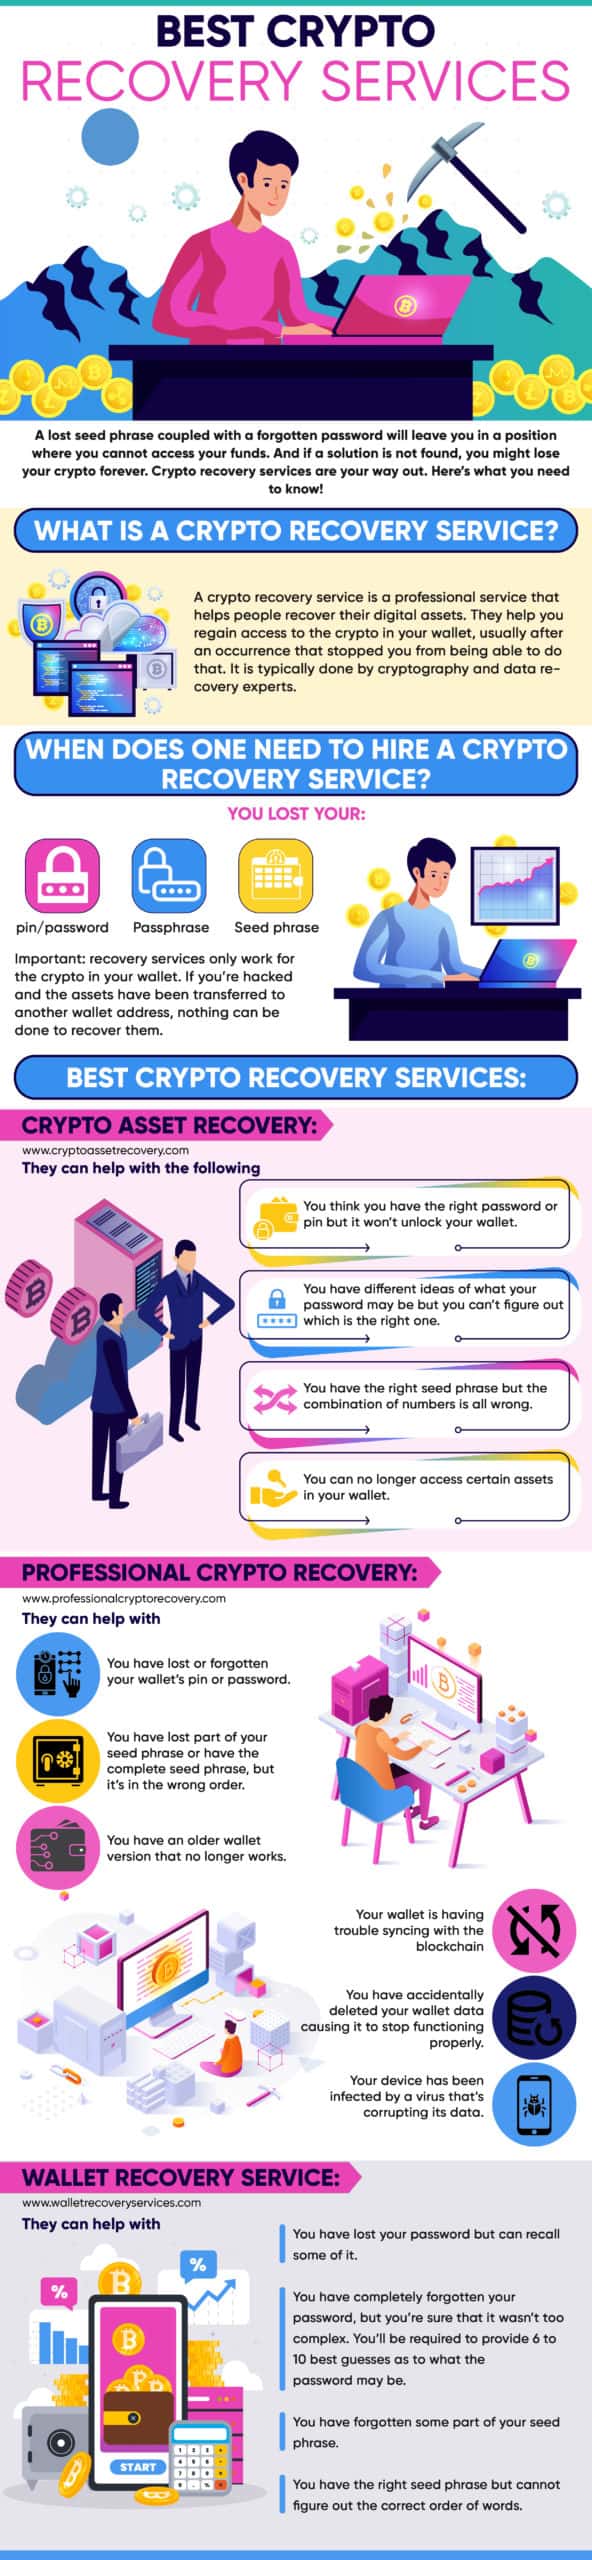 Best Crypto Recovery Services